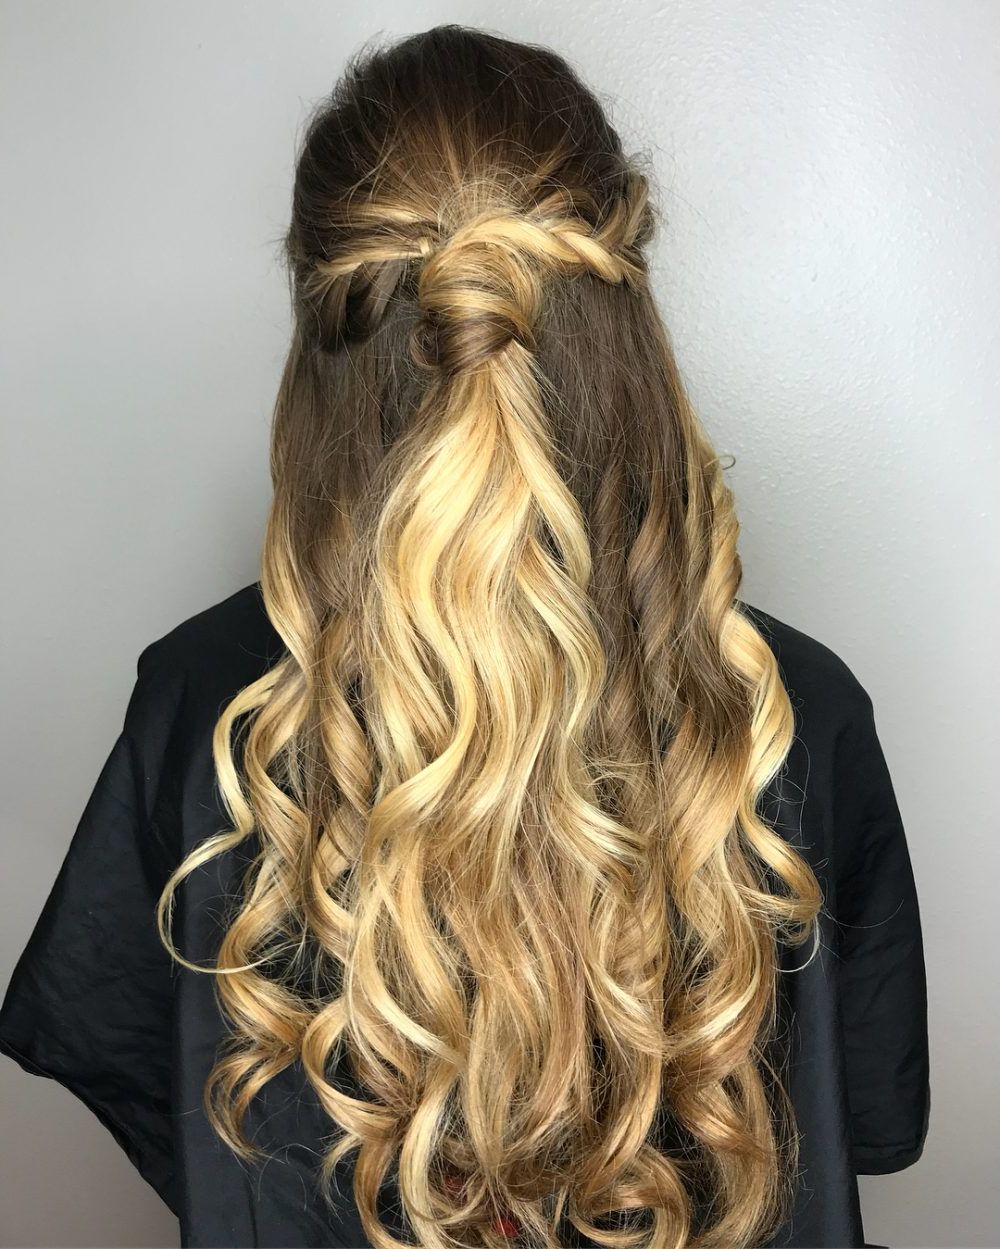 2017 Charming Waves And Curls Prom Hairstyles Within 31 Prom Hairstyles For Long Hair That Are Gorgeous In  (View 16 of 20)